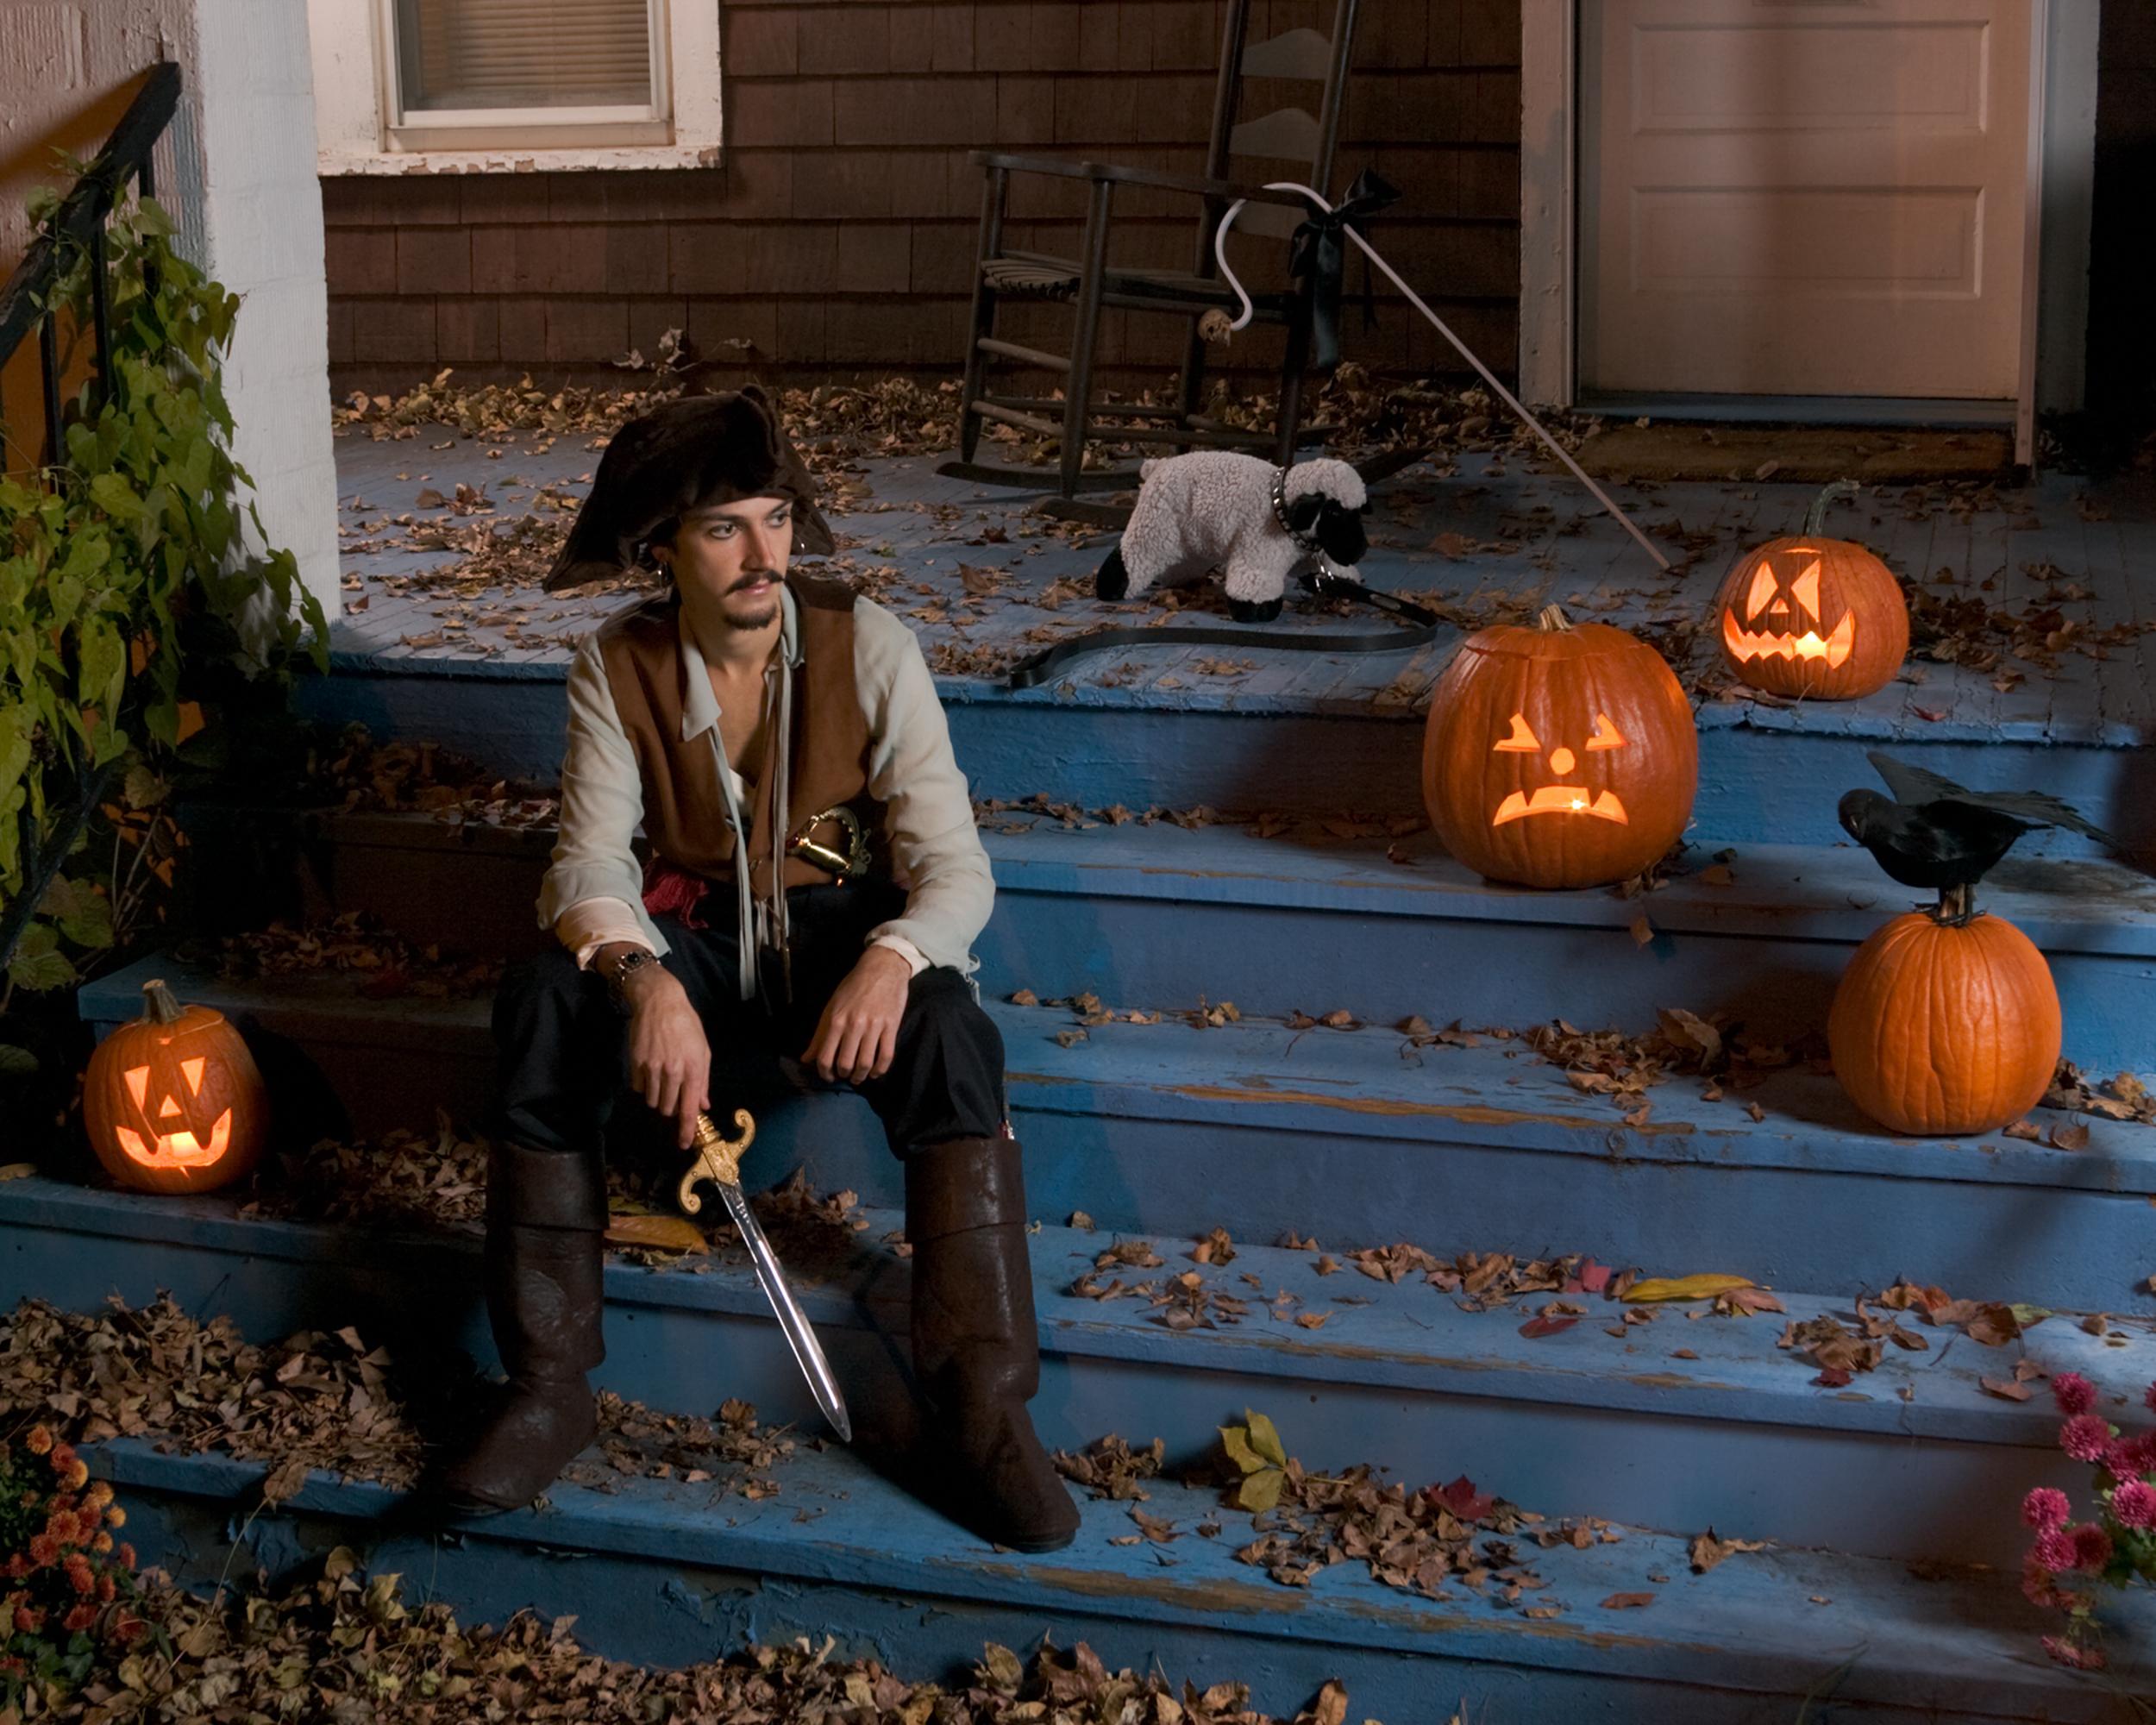 “Easy on the Eyes: Clare“ is a staged photograph of an attractive man dressed as a pirate on Halloween. In this series, I explore the female gaze by providing visual pleasure specifically designed for a female viewer—though others may look over her